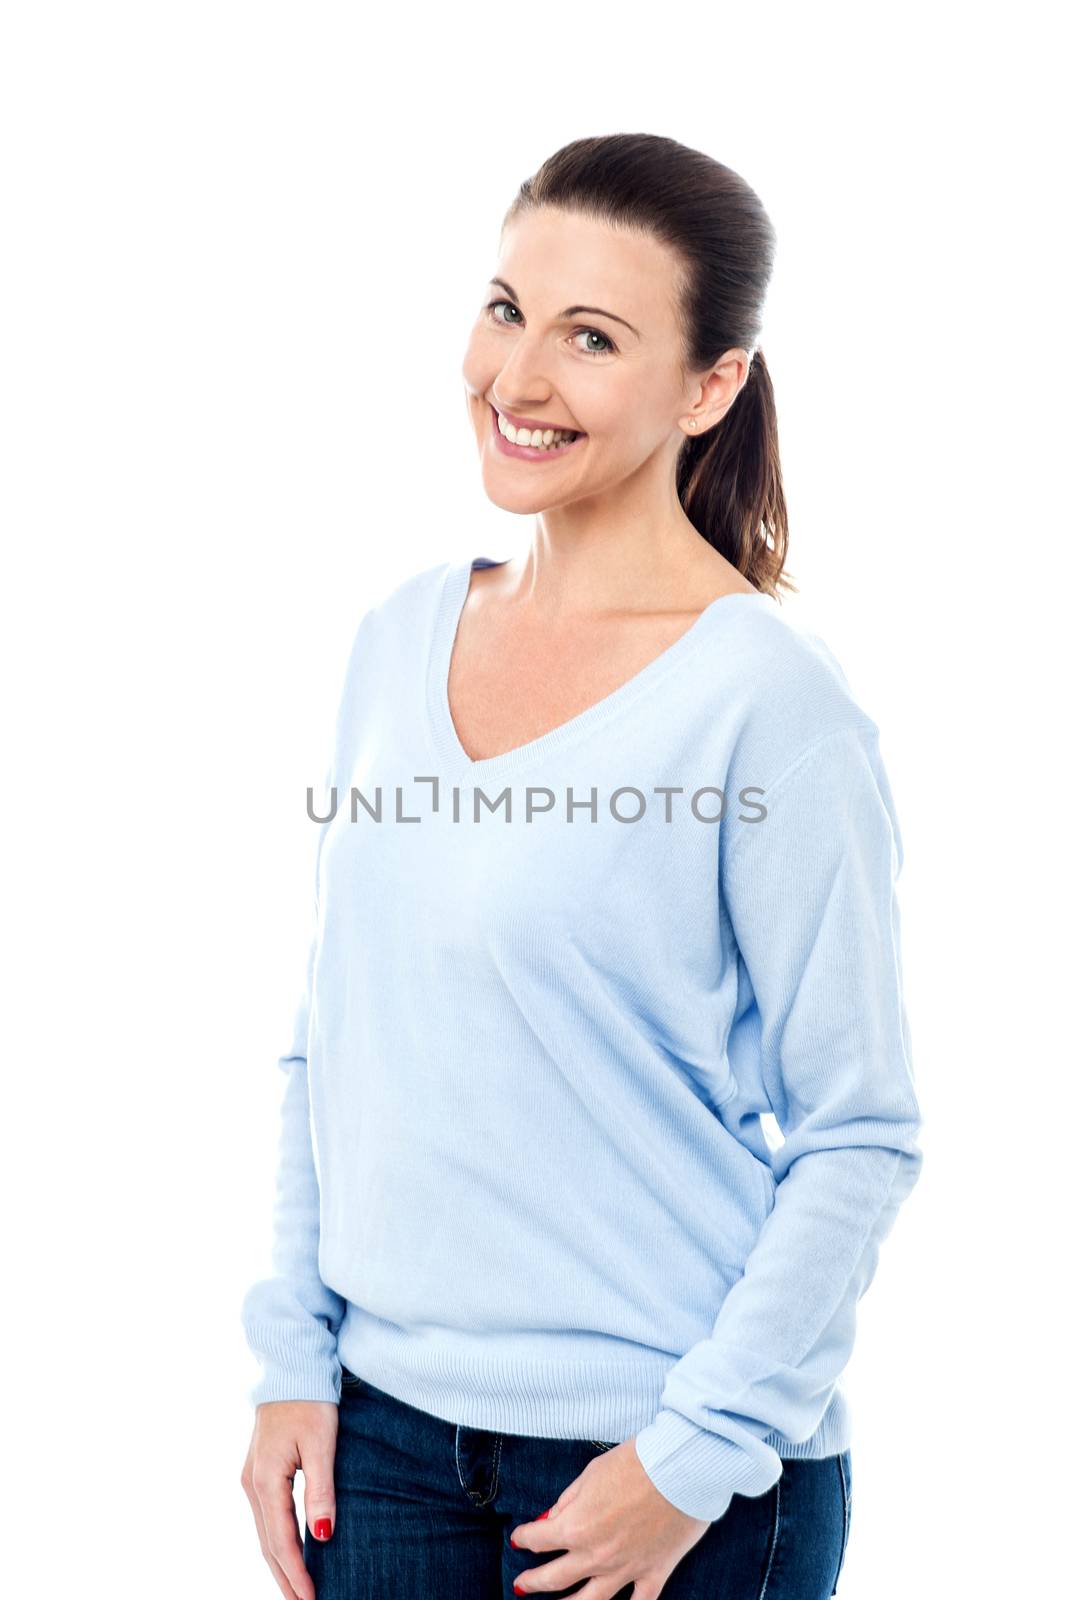 Fashionable woman posing with hands in pockets